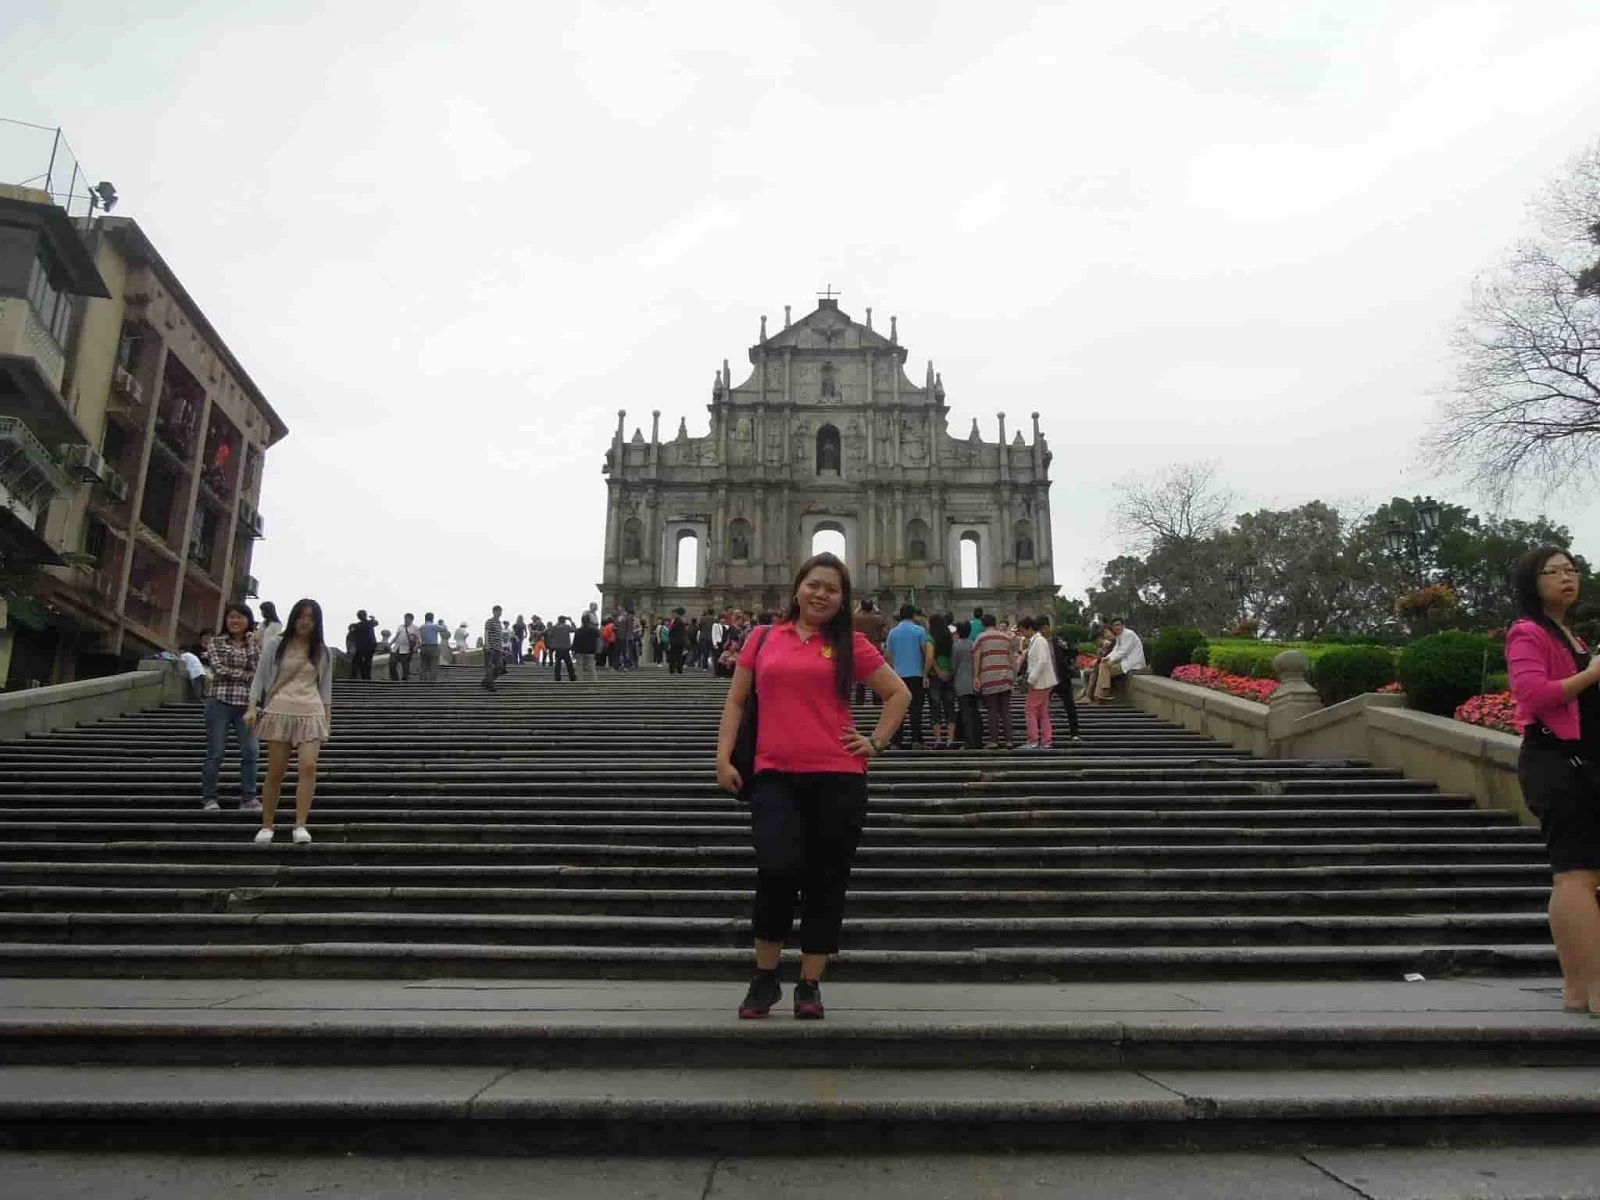 A photo at the stairs with the Ruins of St. Paul's in the background in Macau